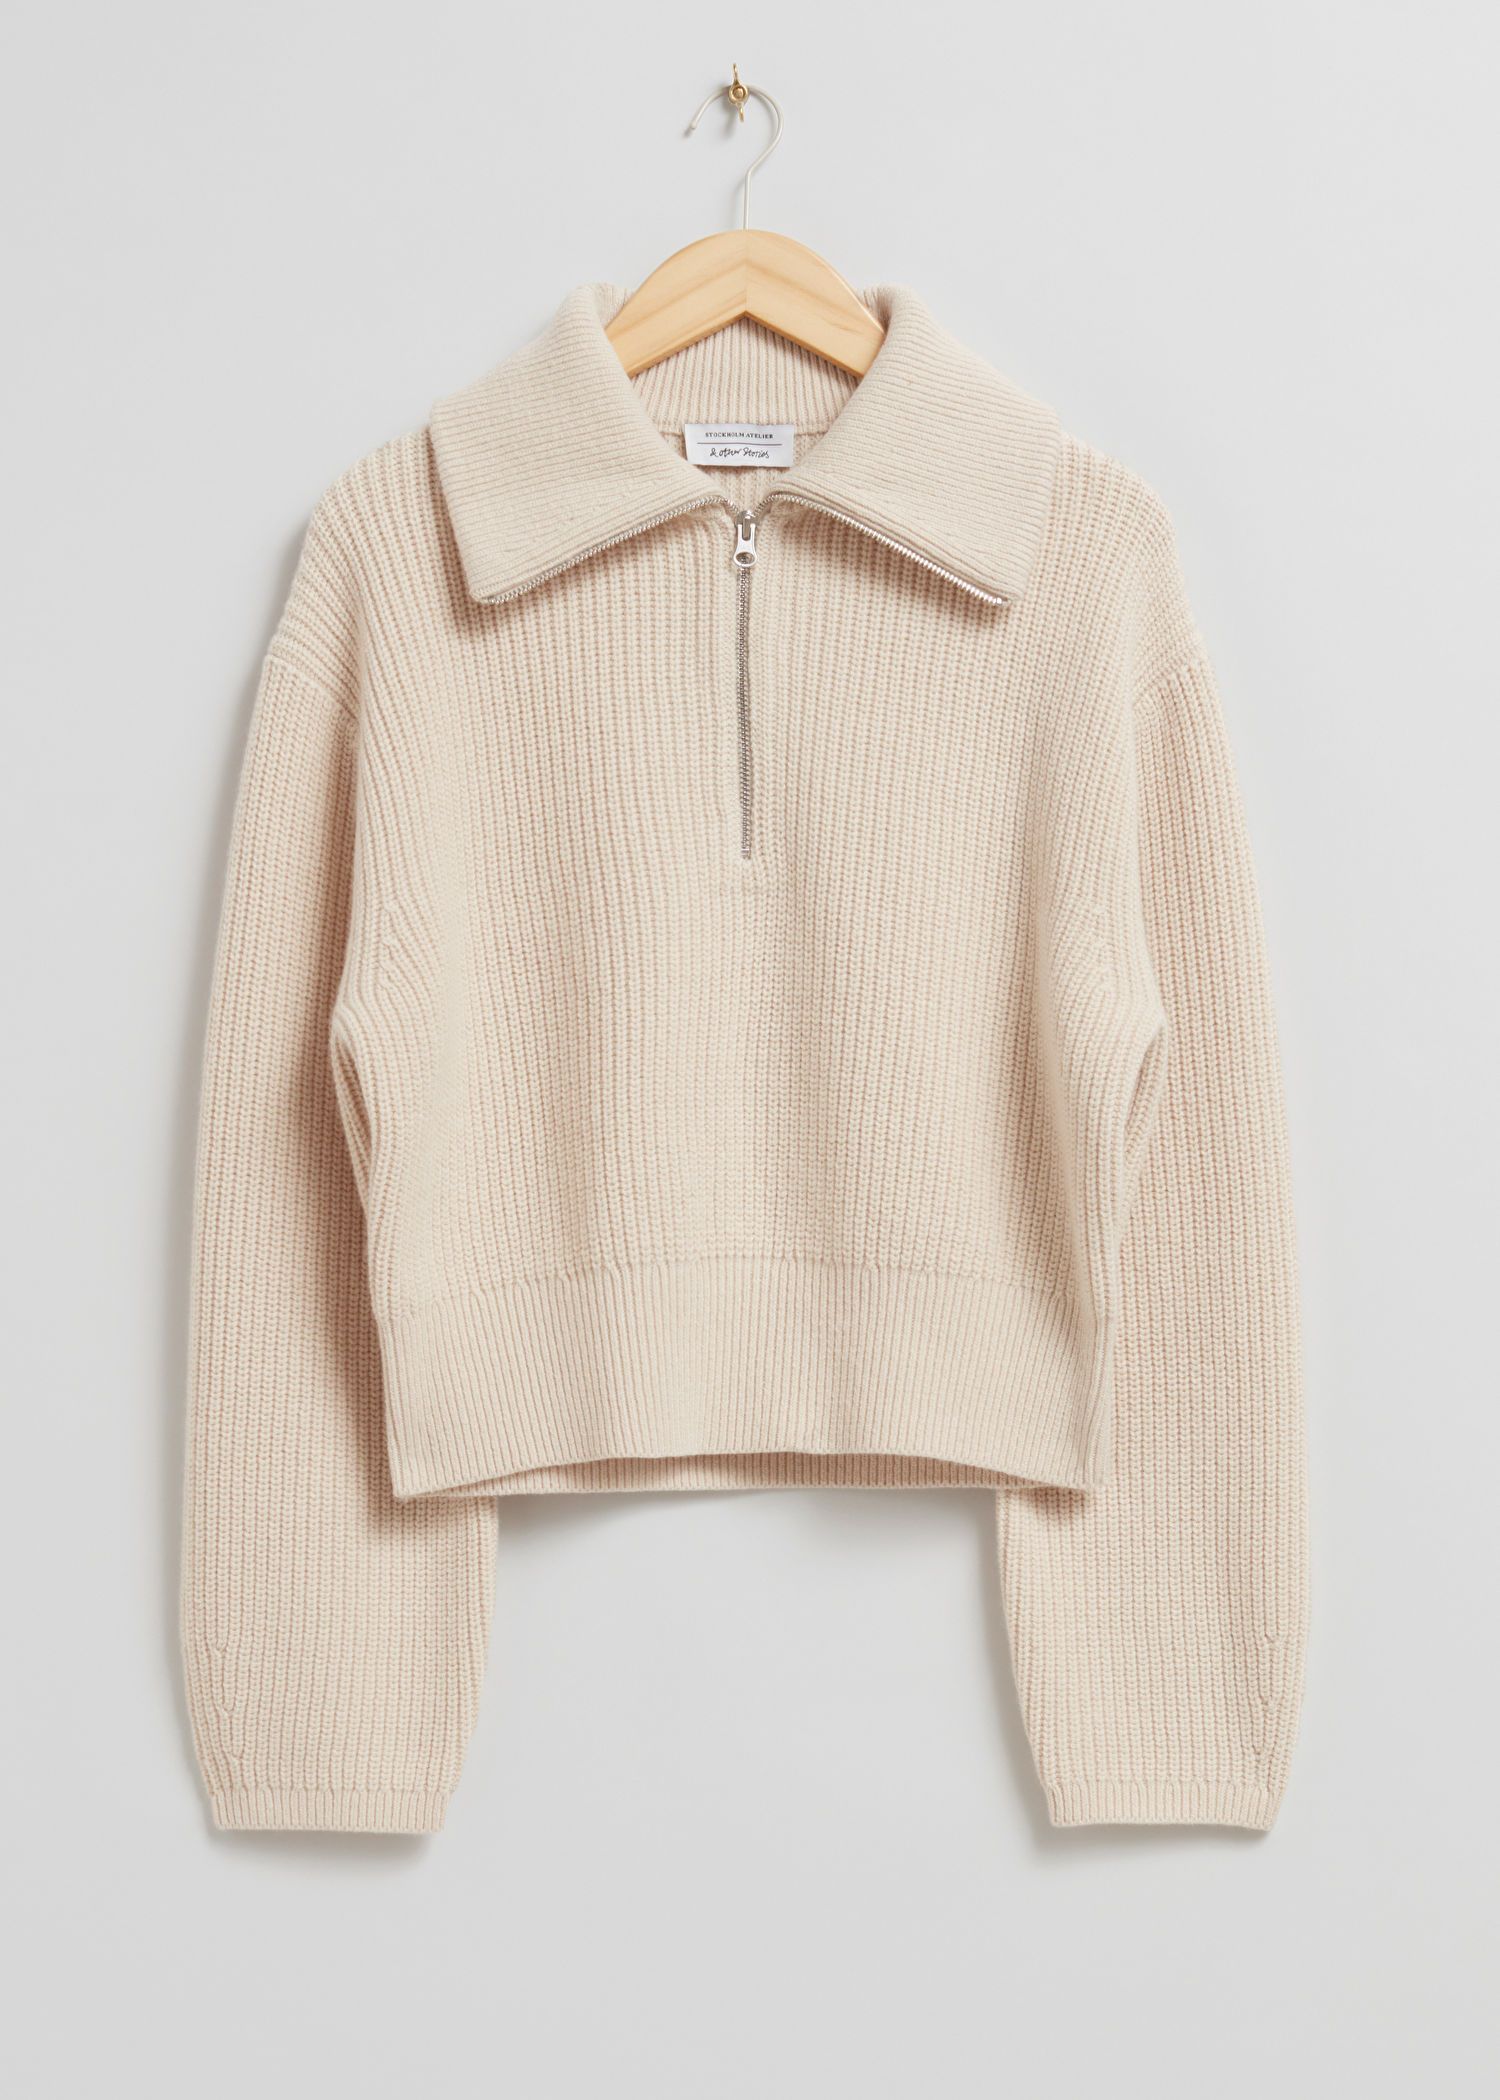 Half-Zip Knit Sweater | & Other Stories US